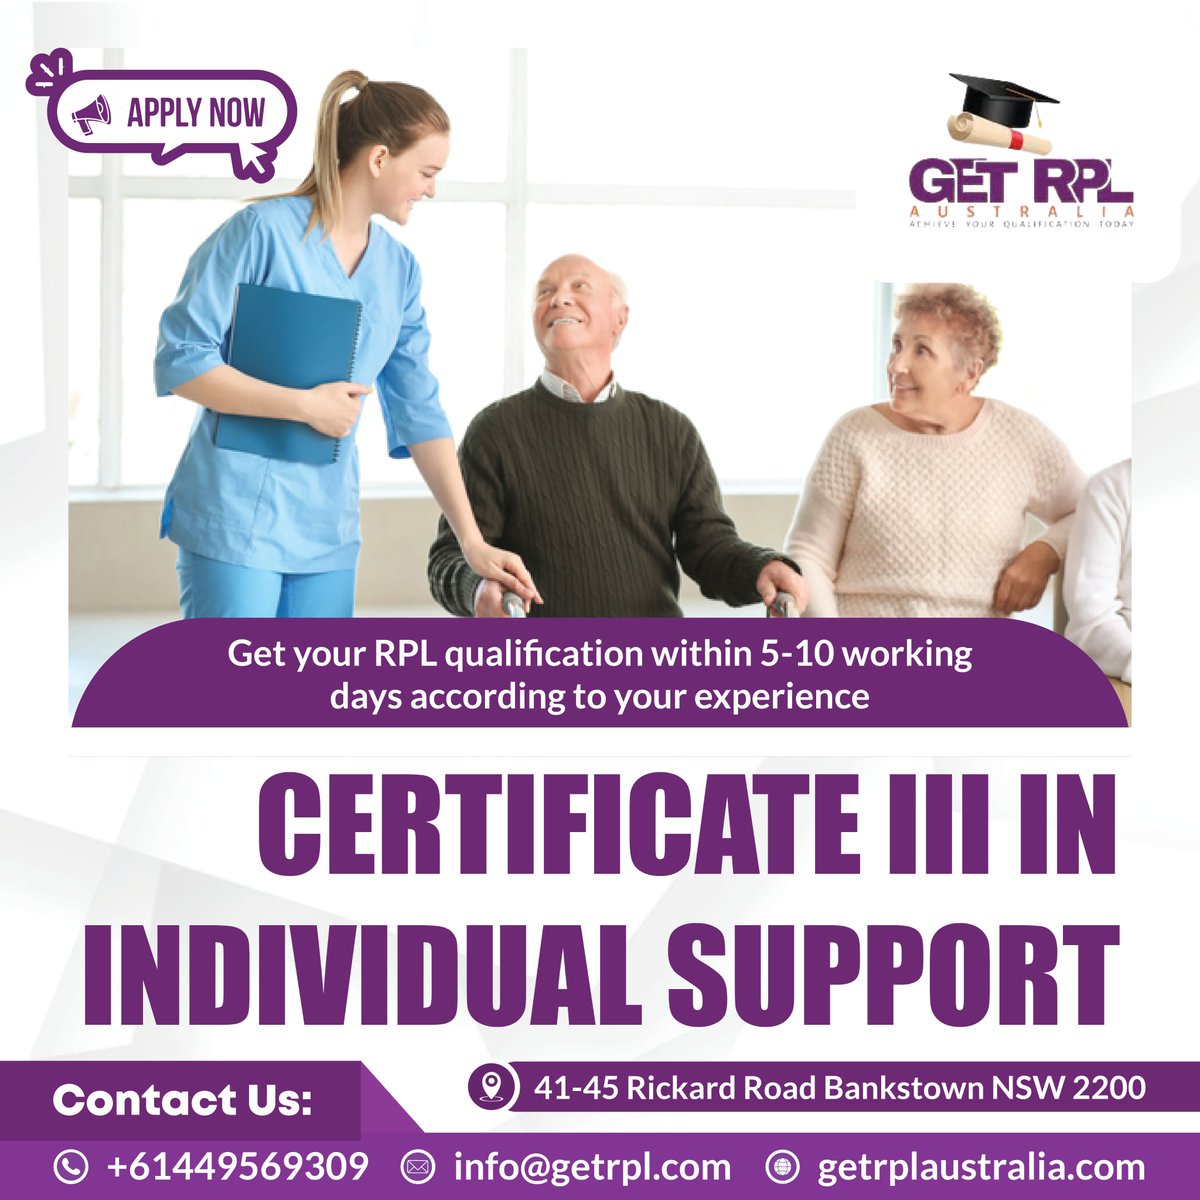 Exciting news! 
Embark on a journey of compassion and care with our new offering: Certificate III in Individual Support! Don't miss out on this opportunity to embark on a path that truly matters.
Call:  0449 569 309
#individualsupport #HealthcareJobs #Lehrmann #Bishop #Australia